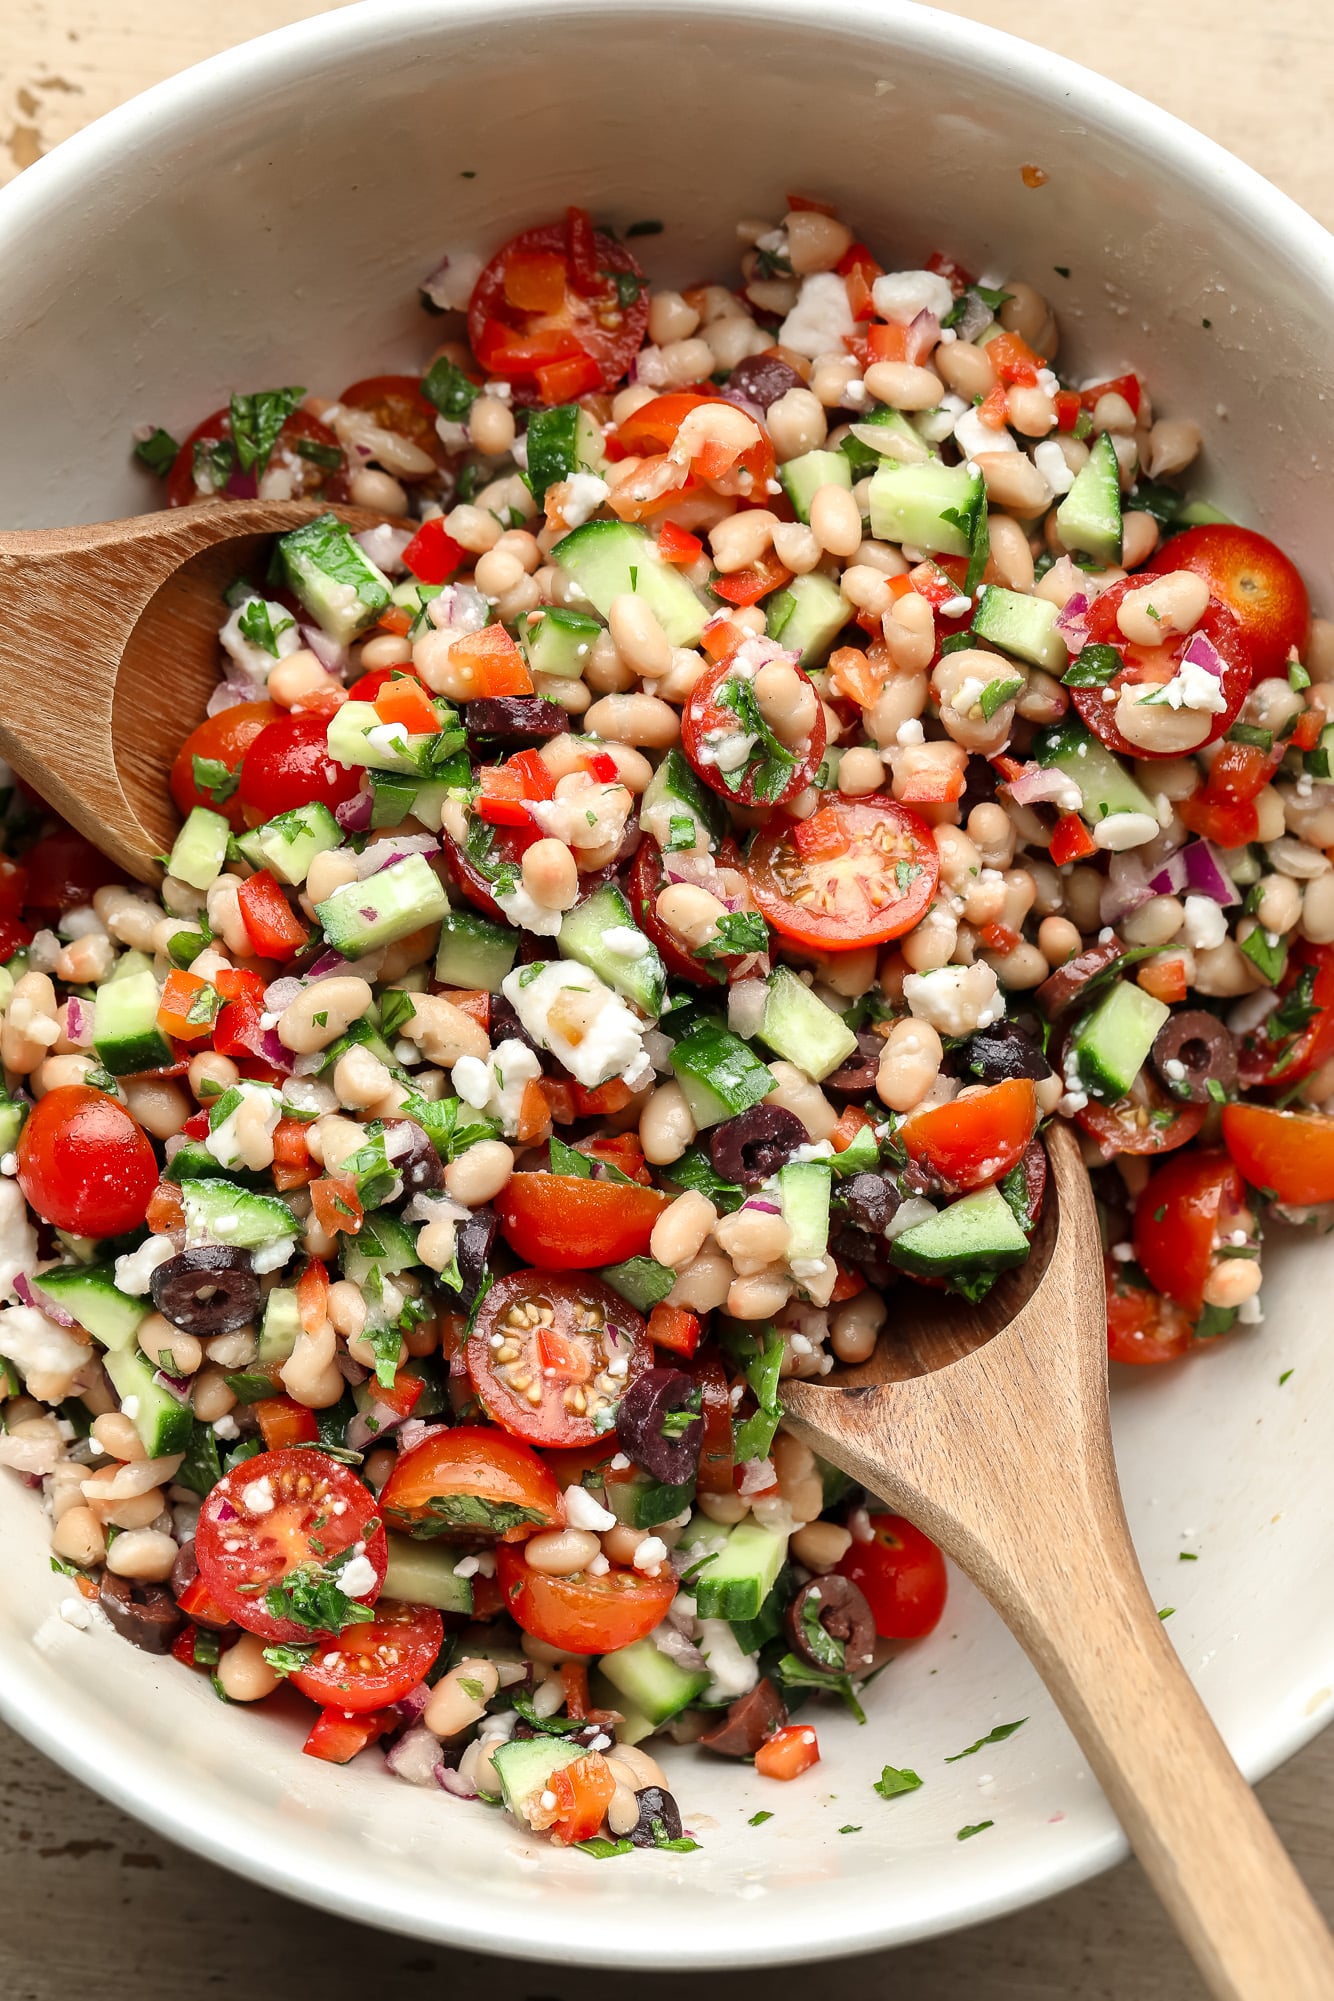 using two wooden spoons to toss a white bean salad together.